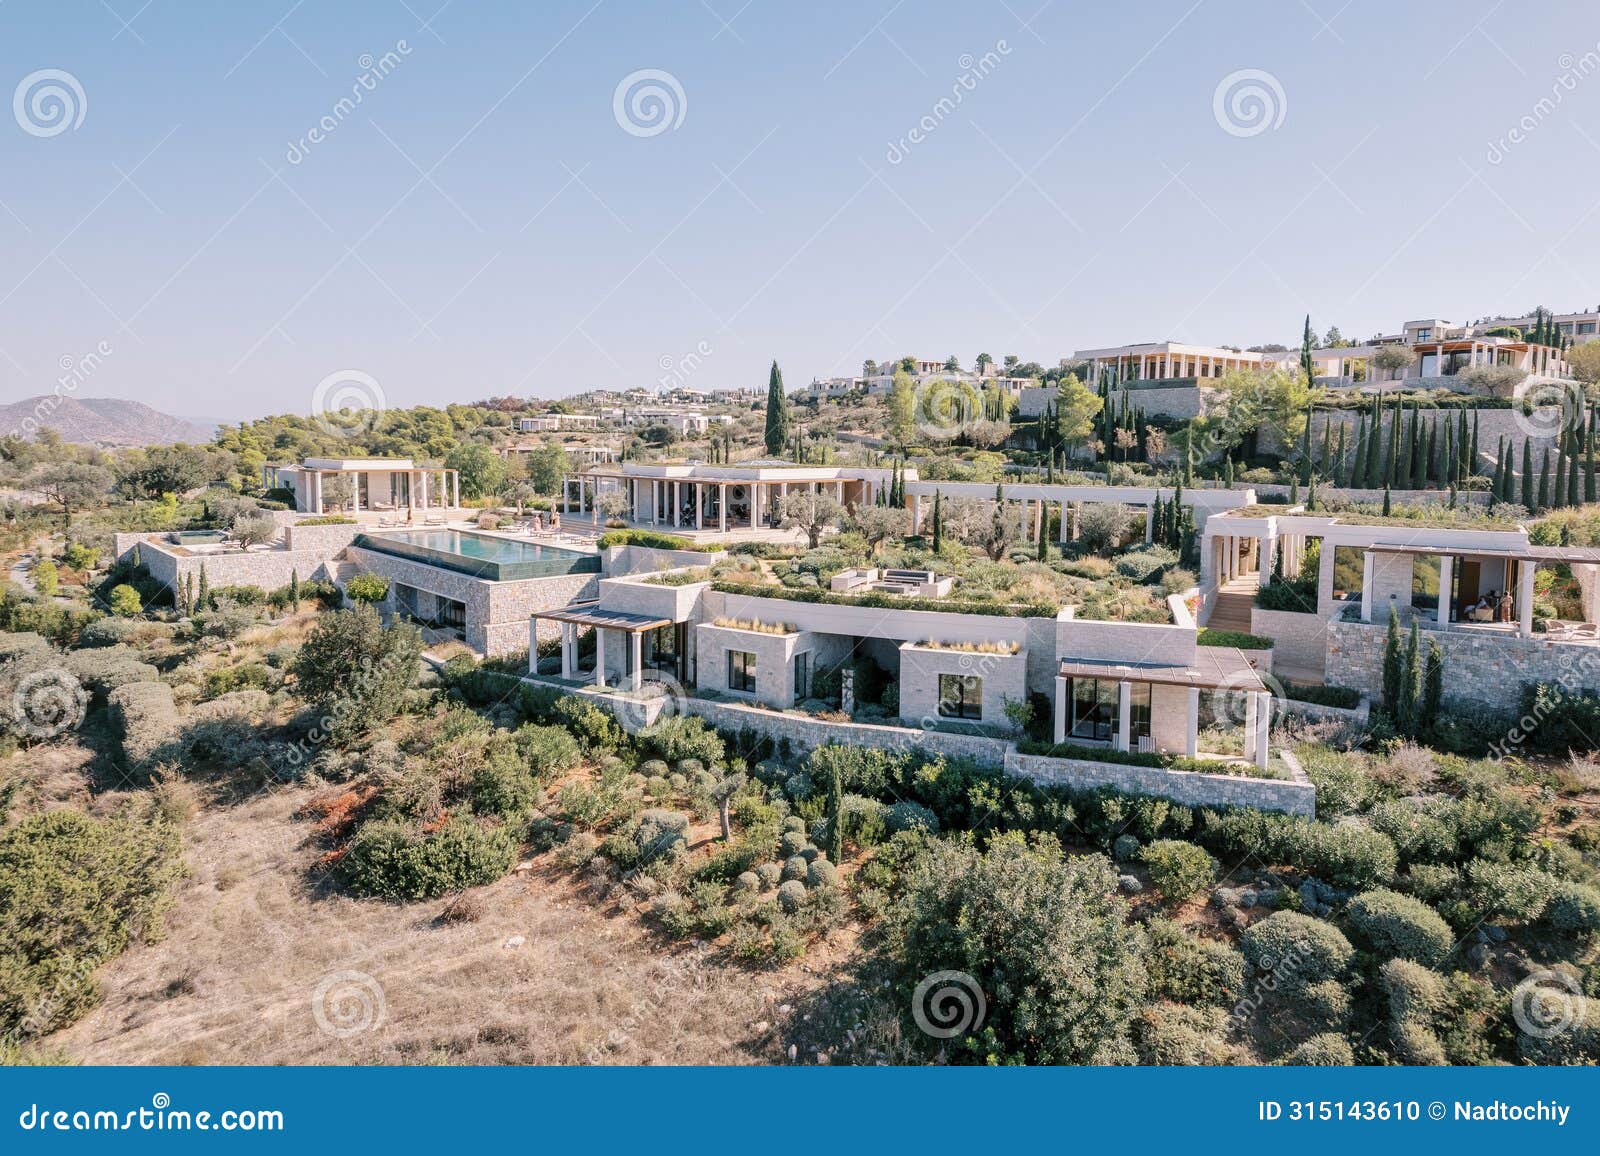 hotel complex with colonnades on a hill. amanzoe, peloponnese, greece. drone